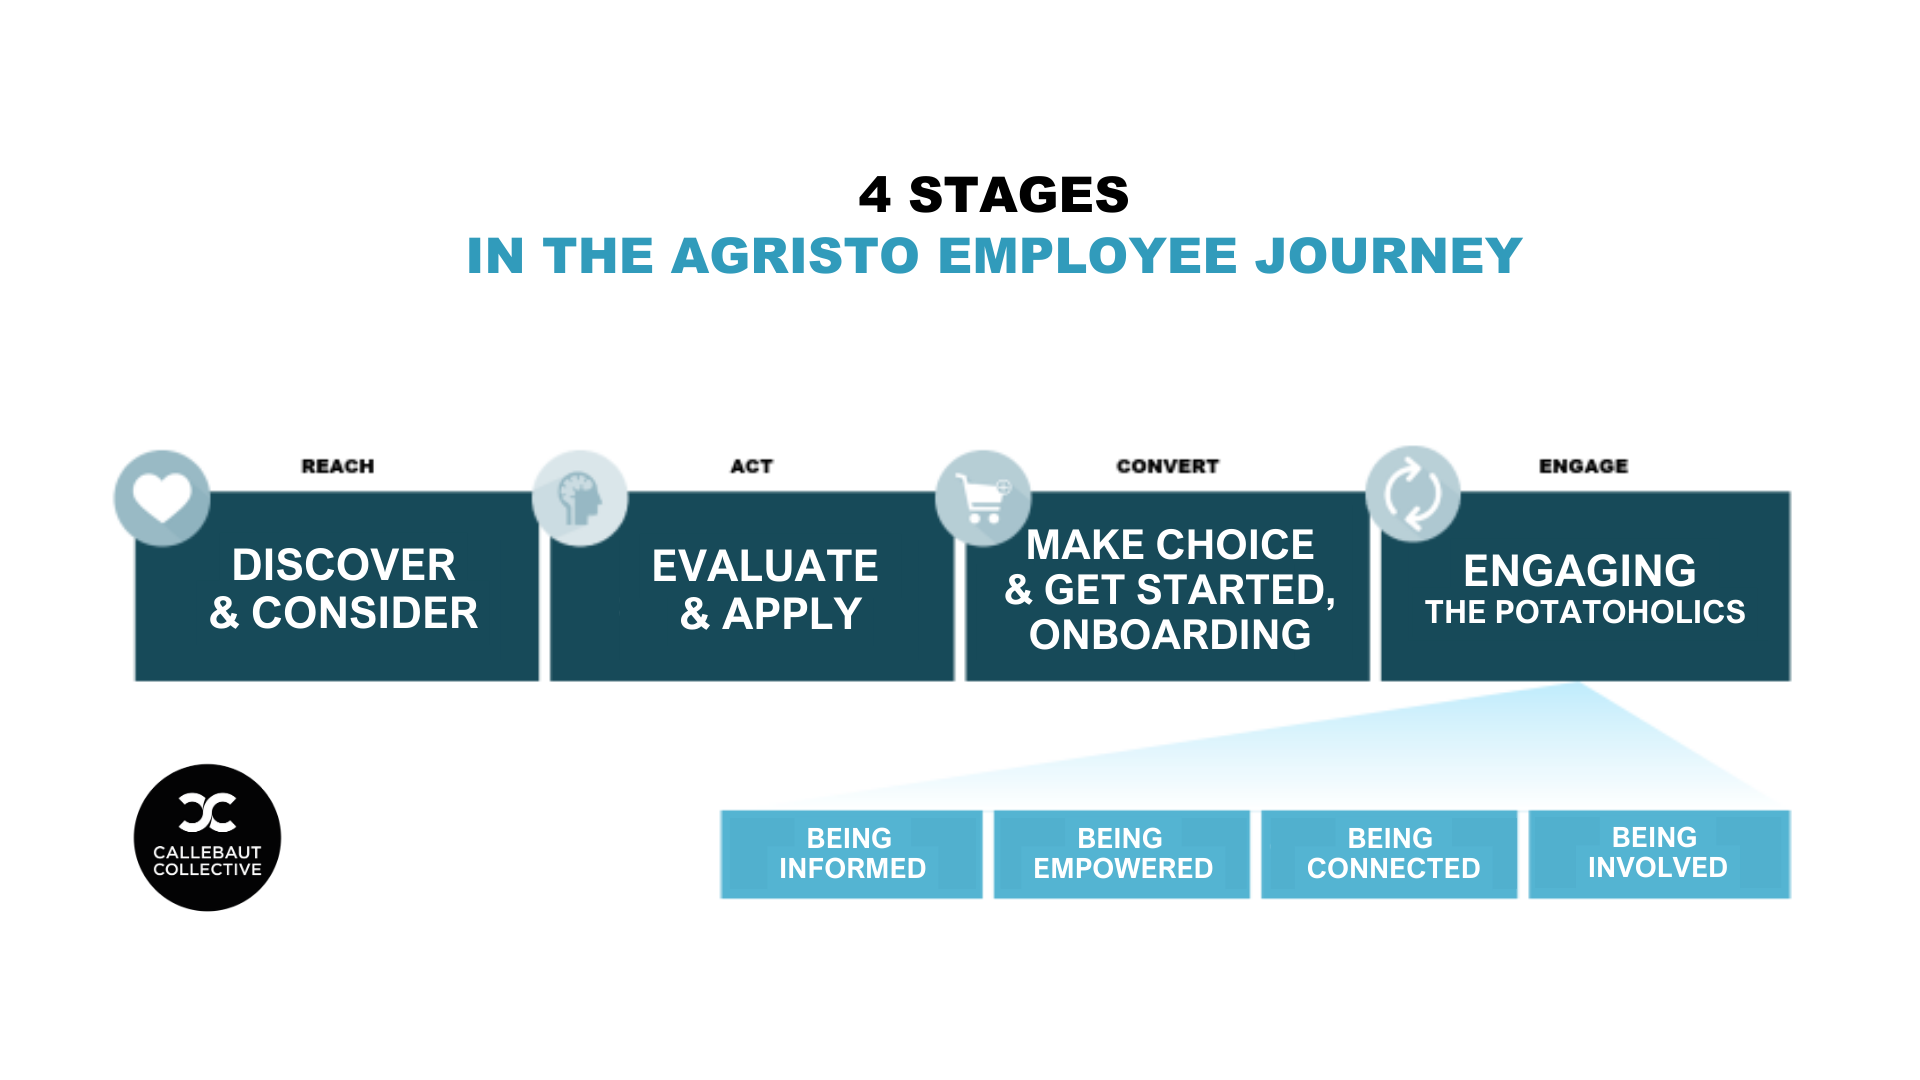 Four stages in the Agristo employee journey